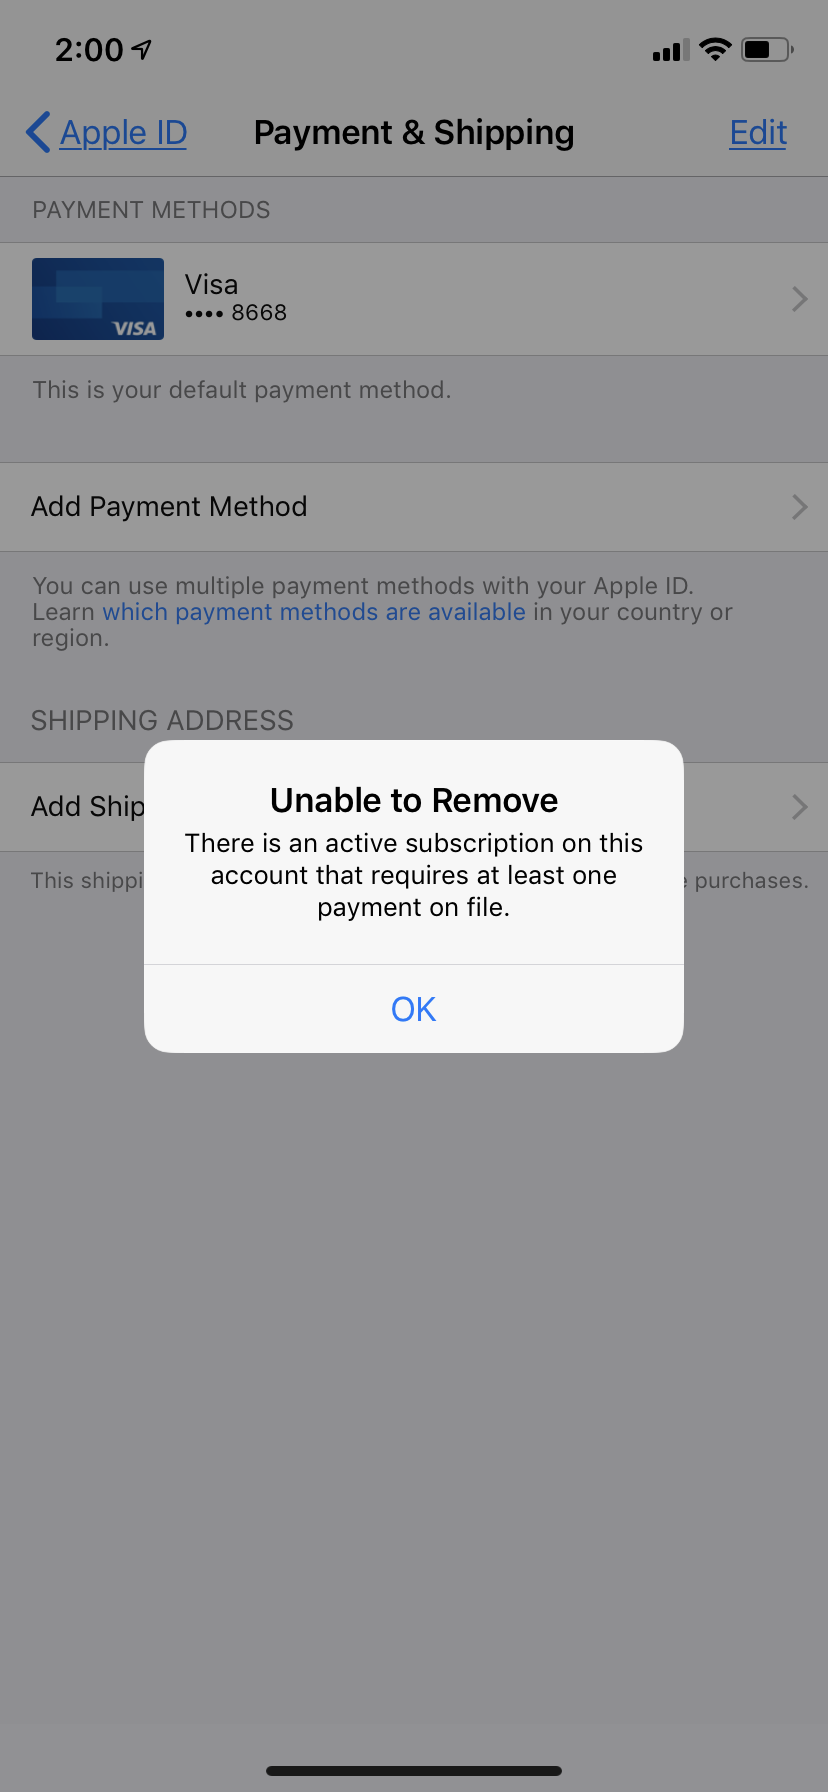 Why won t Apple let me remove my payment?